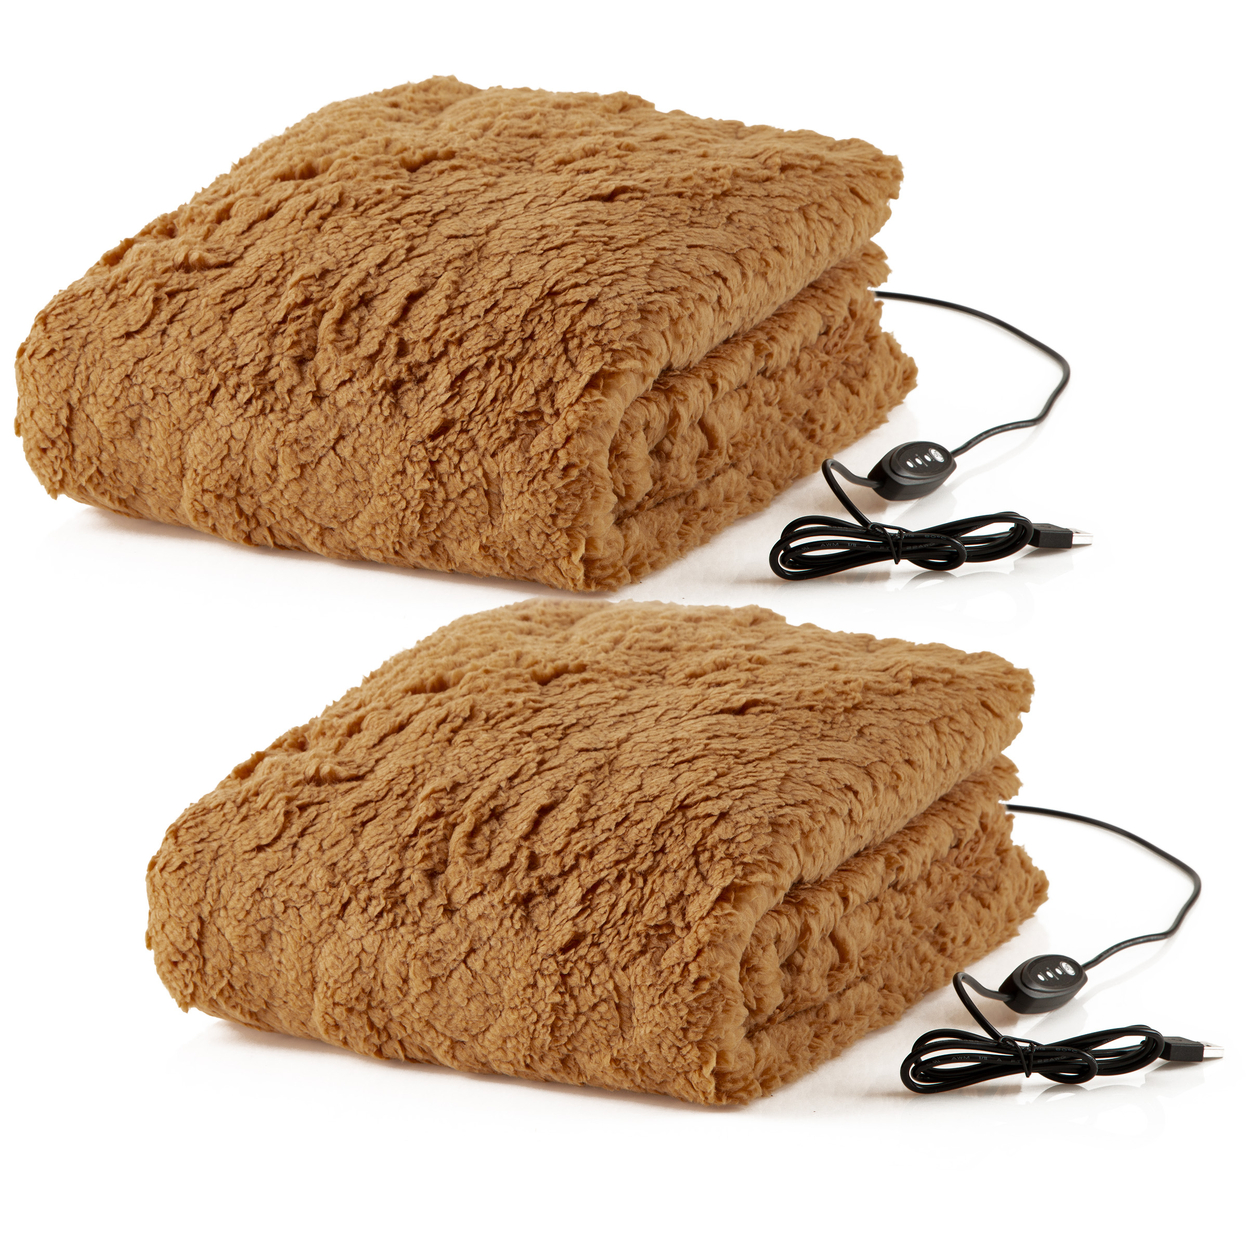 2Pack Heated Blanket USB-Powered Sherpa Throw Blankets Winter Car Accessories - Bronze